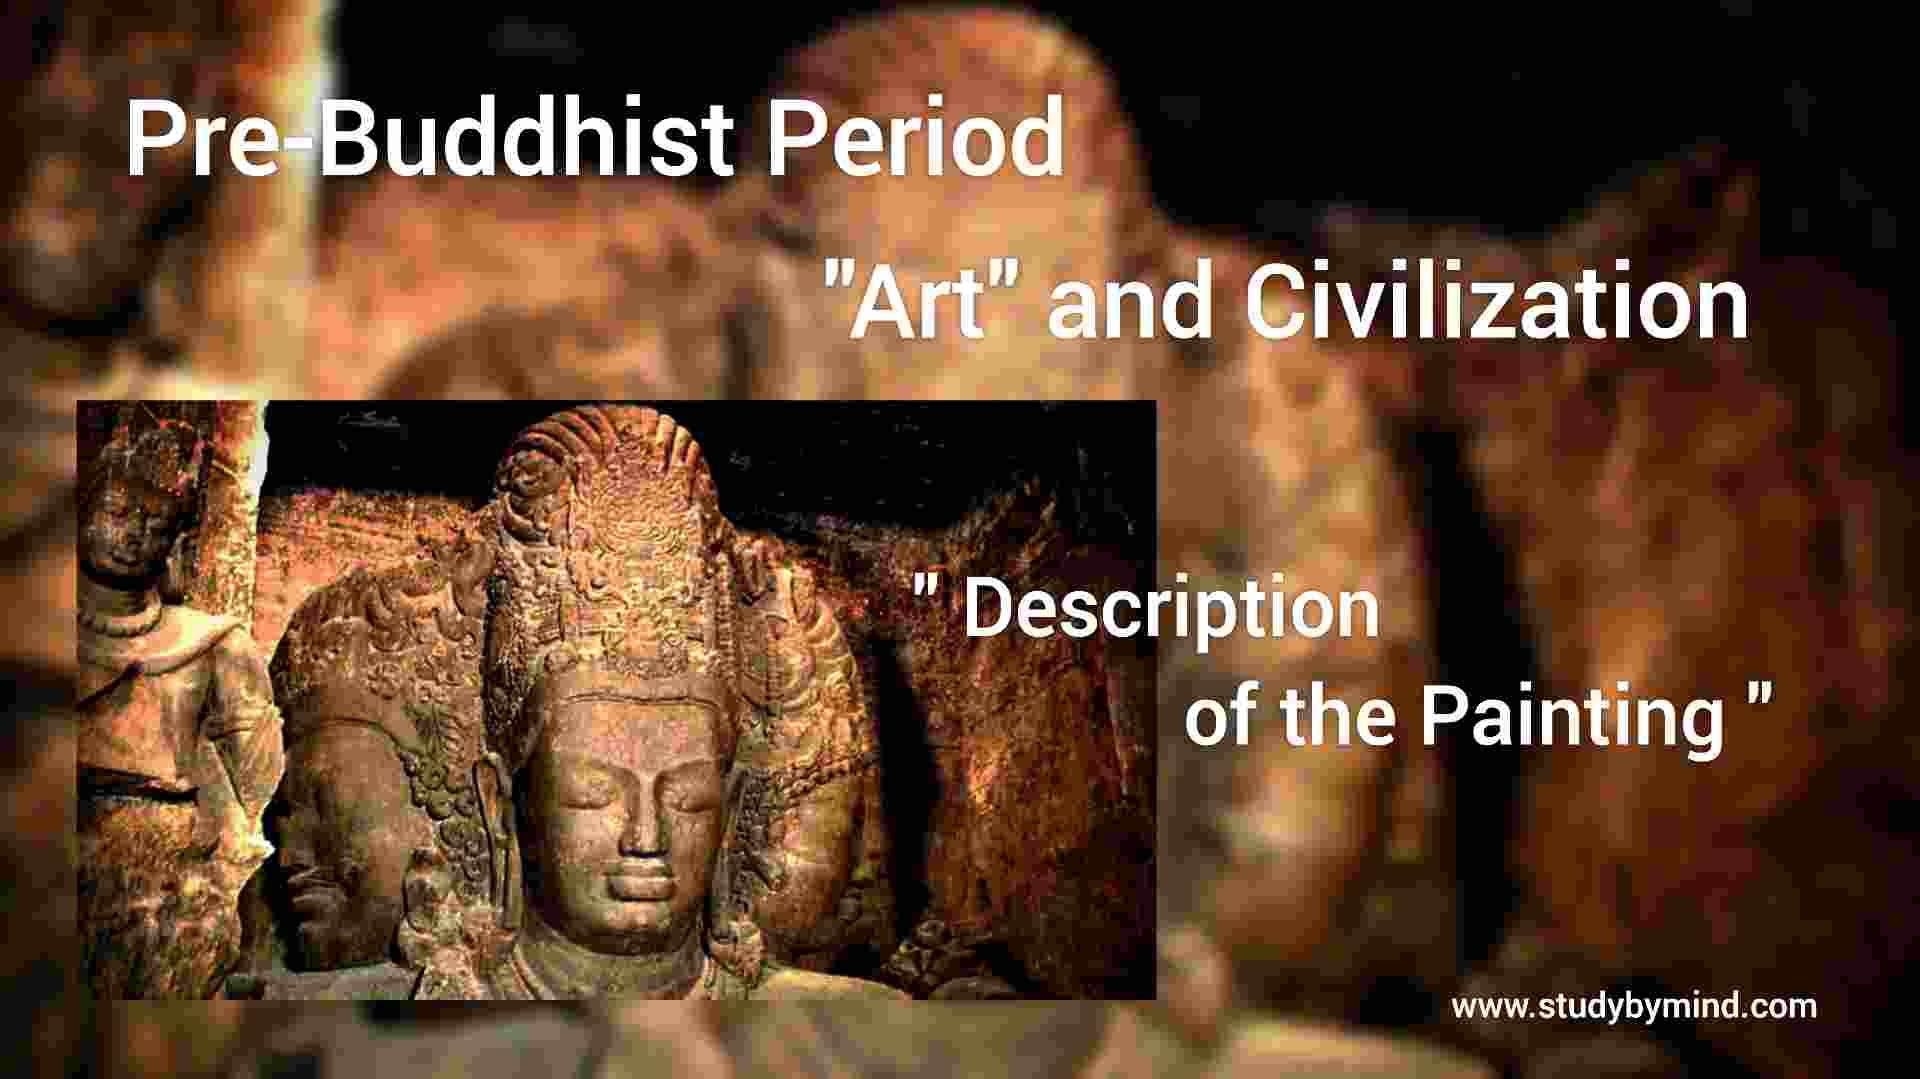 You are currently viewing Art and Civilization of the Pre-Buddhist Period